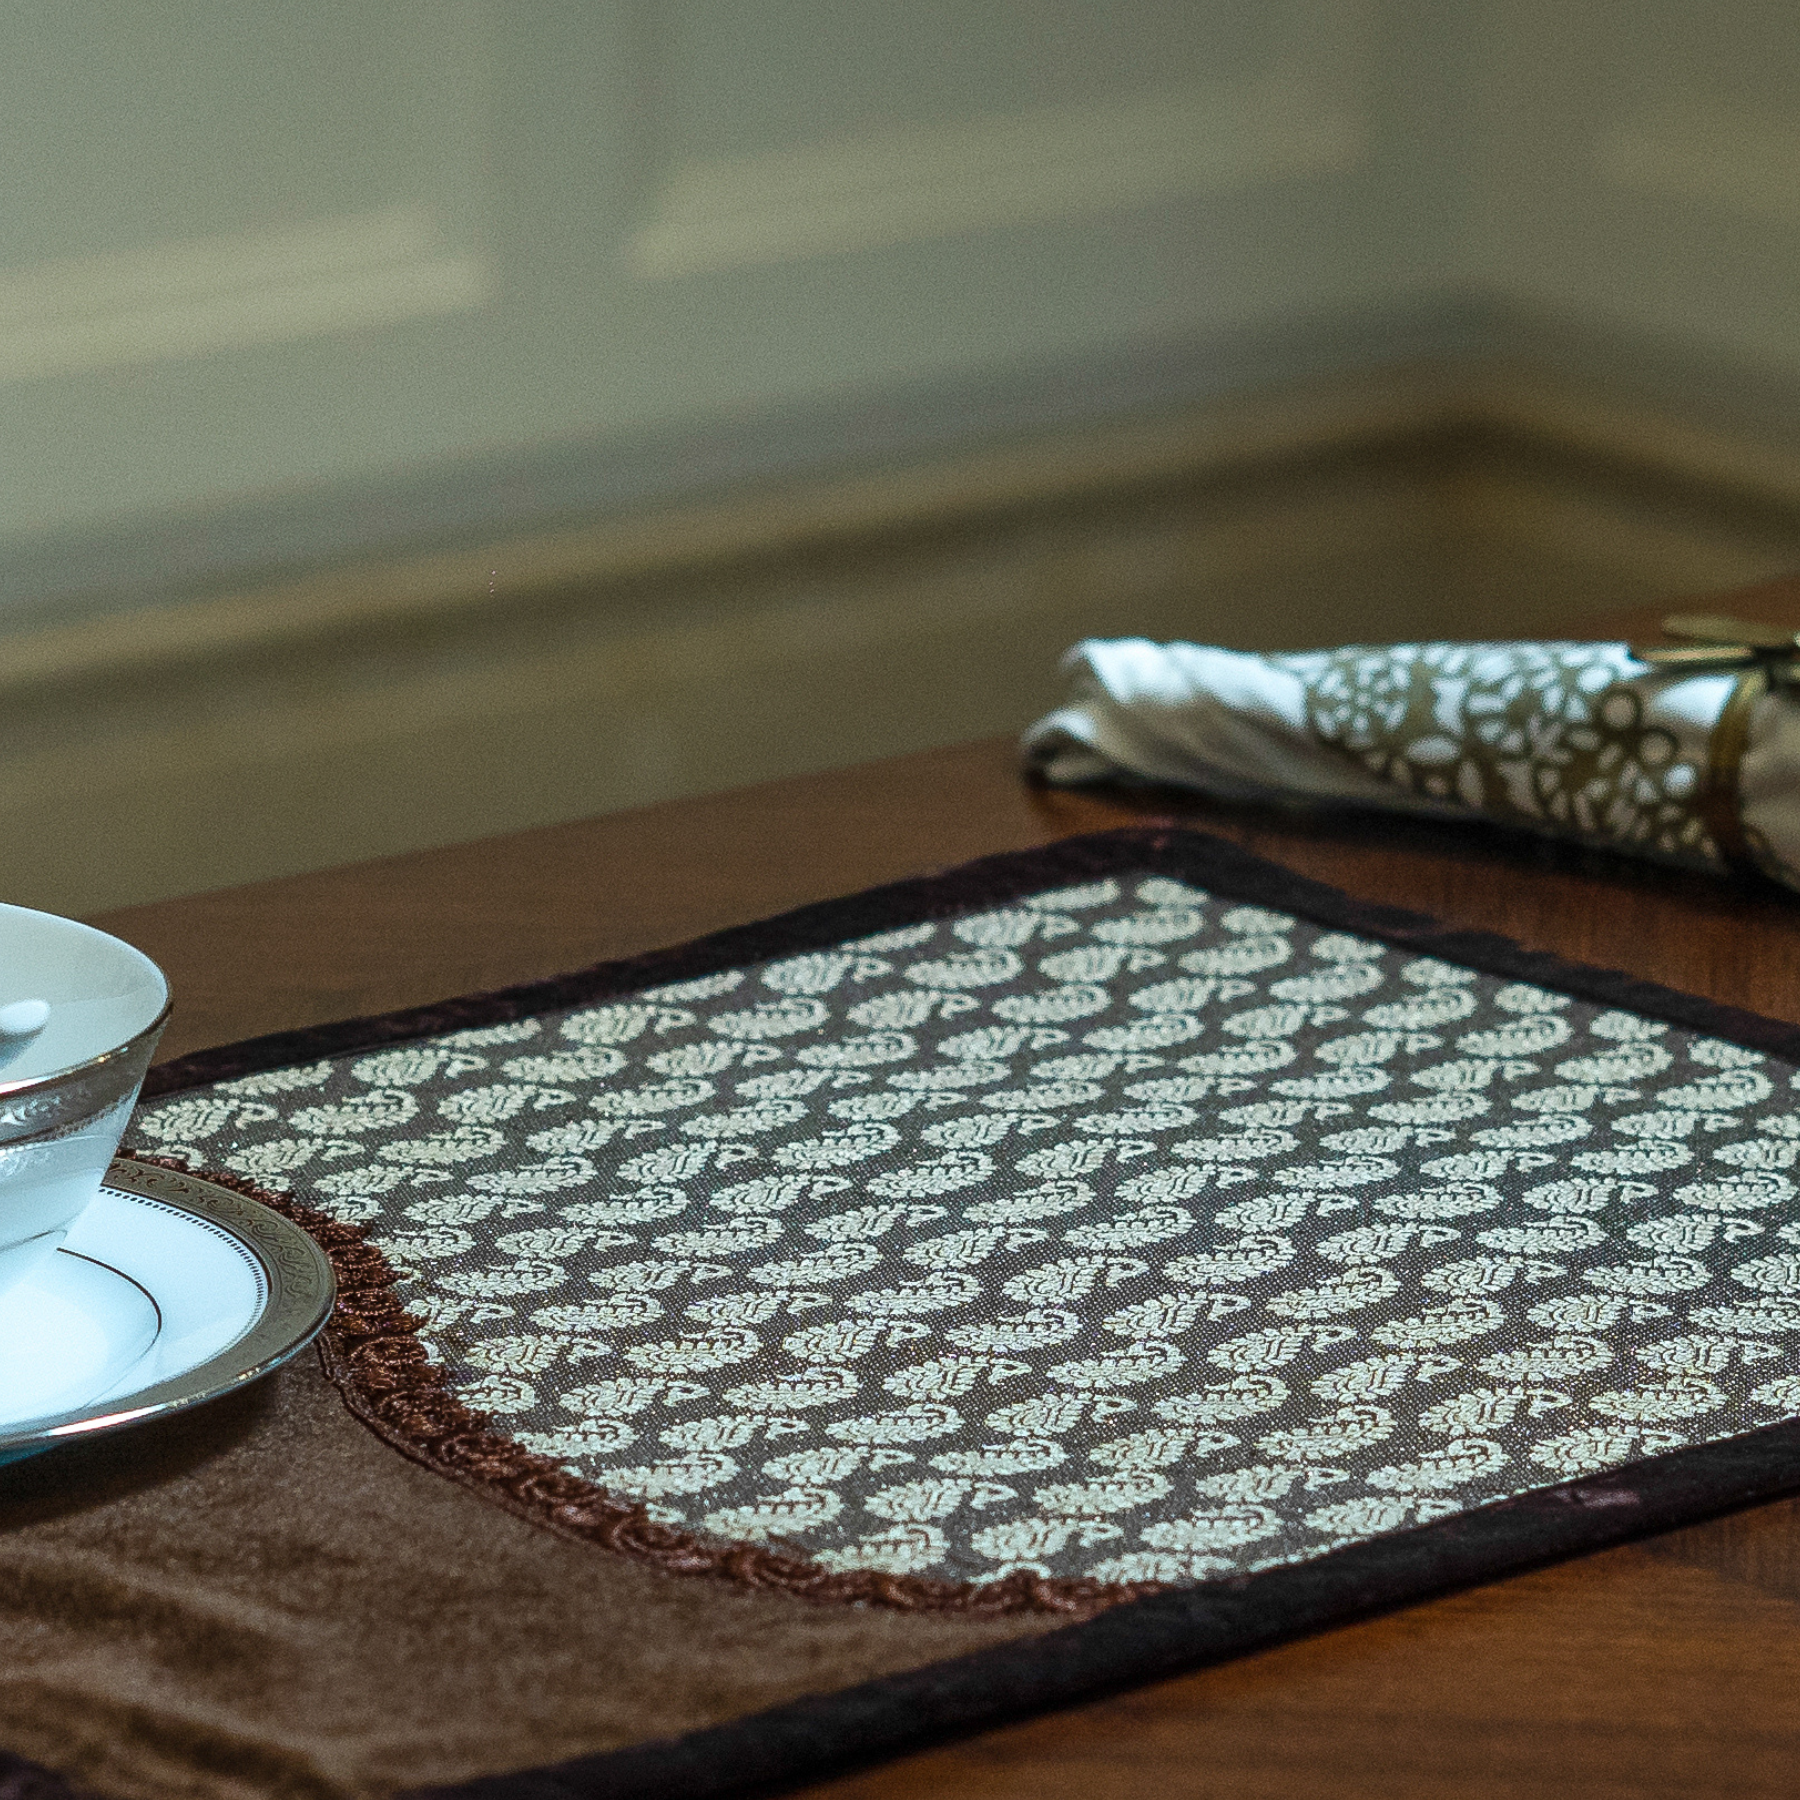 The Luxelife Noir Placemats